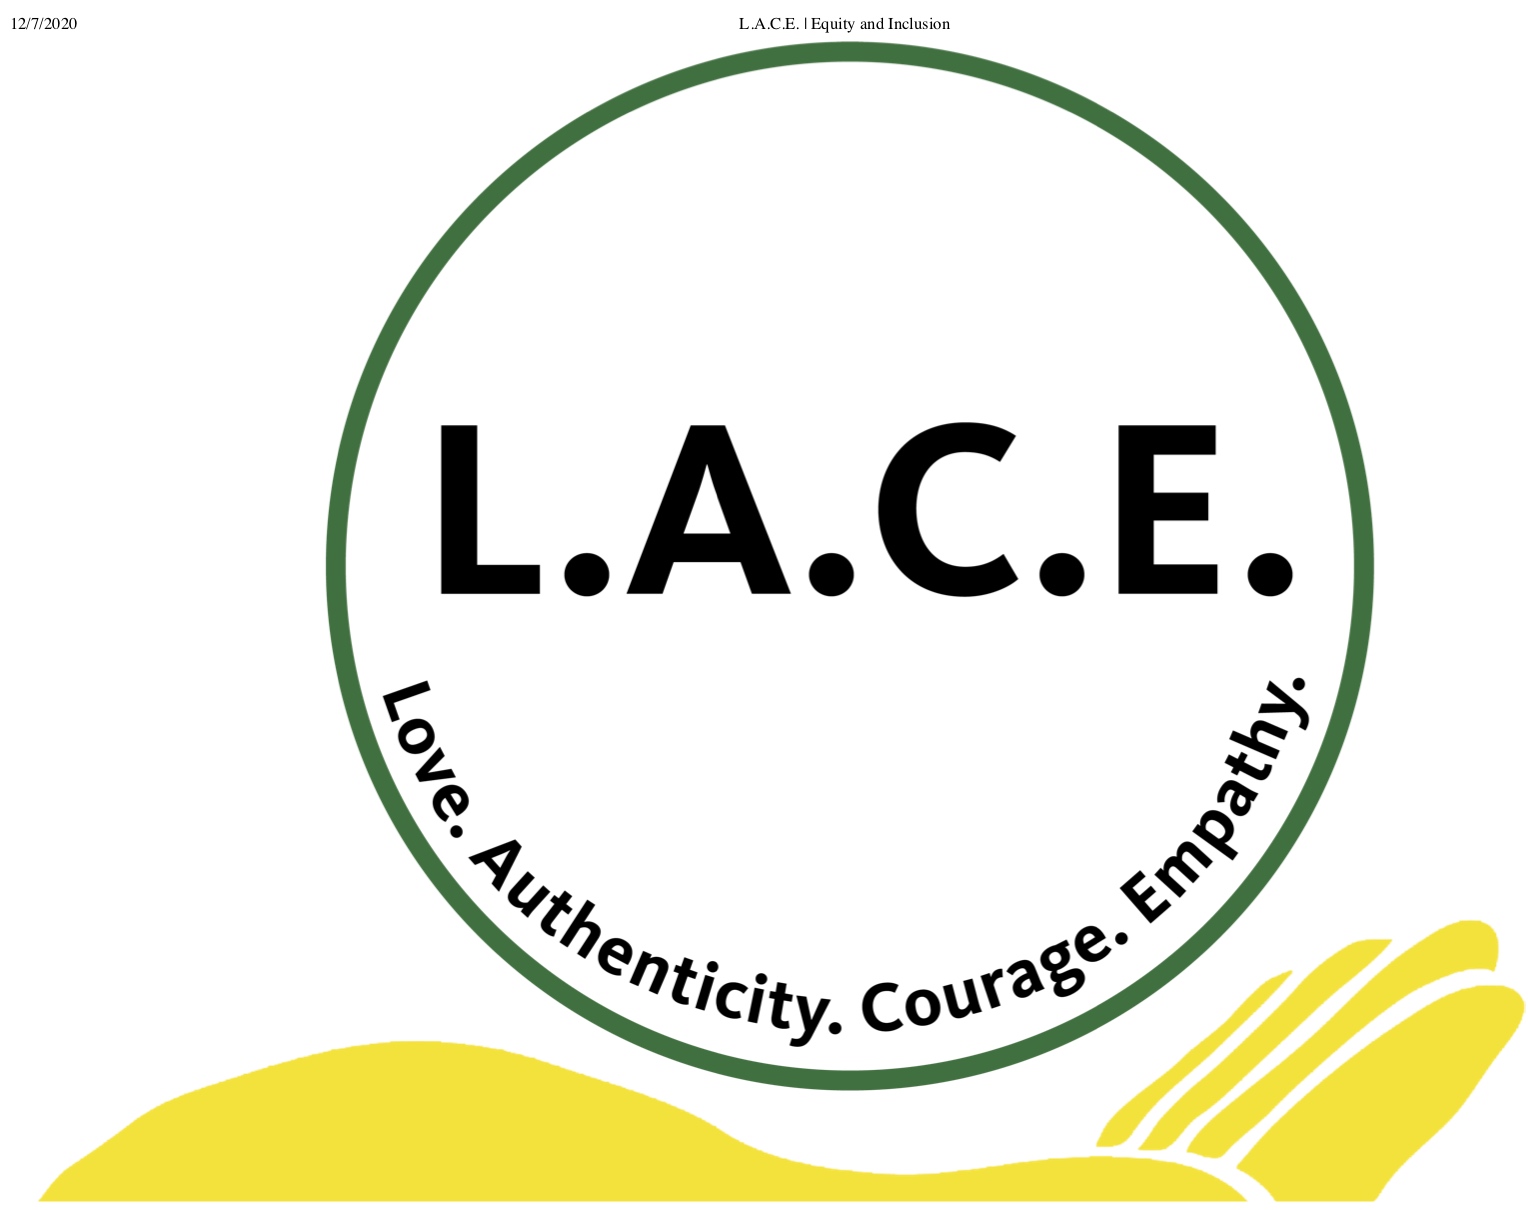 L.A.C.E. equity and inclusion